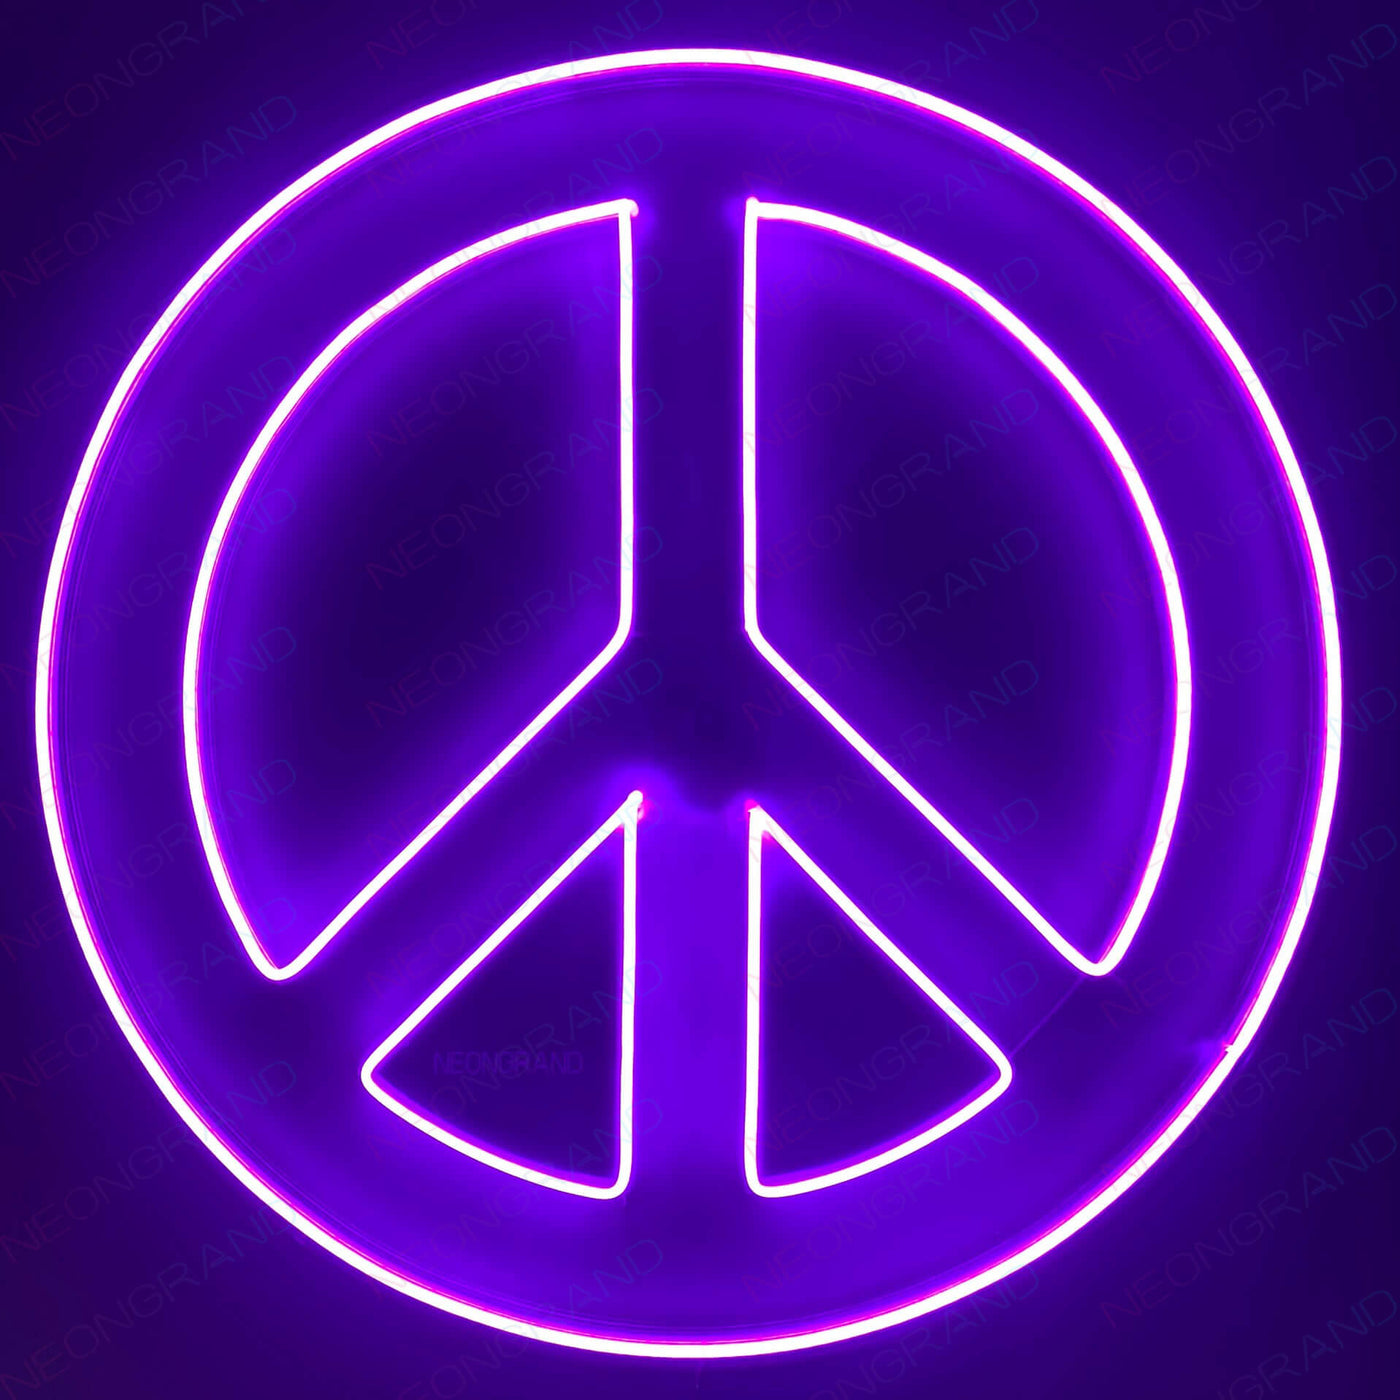 Neon Peace Sign Led Light, Lighted Up Peace Neon Signs wm